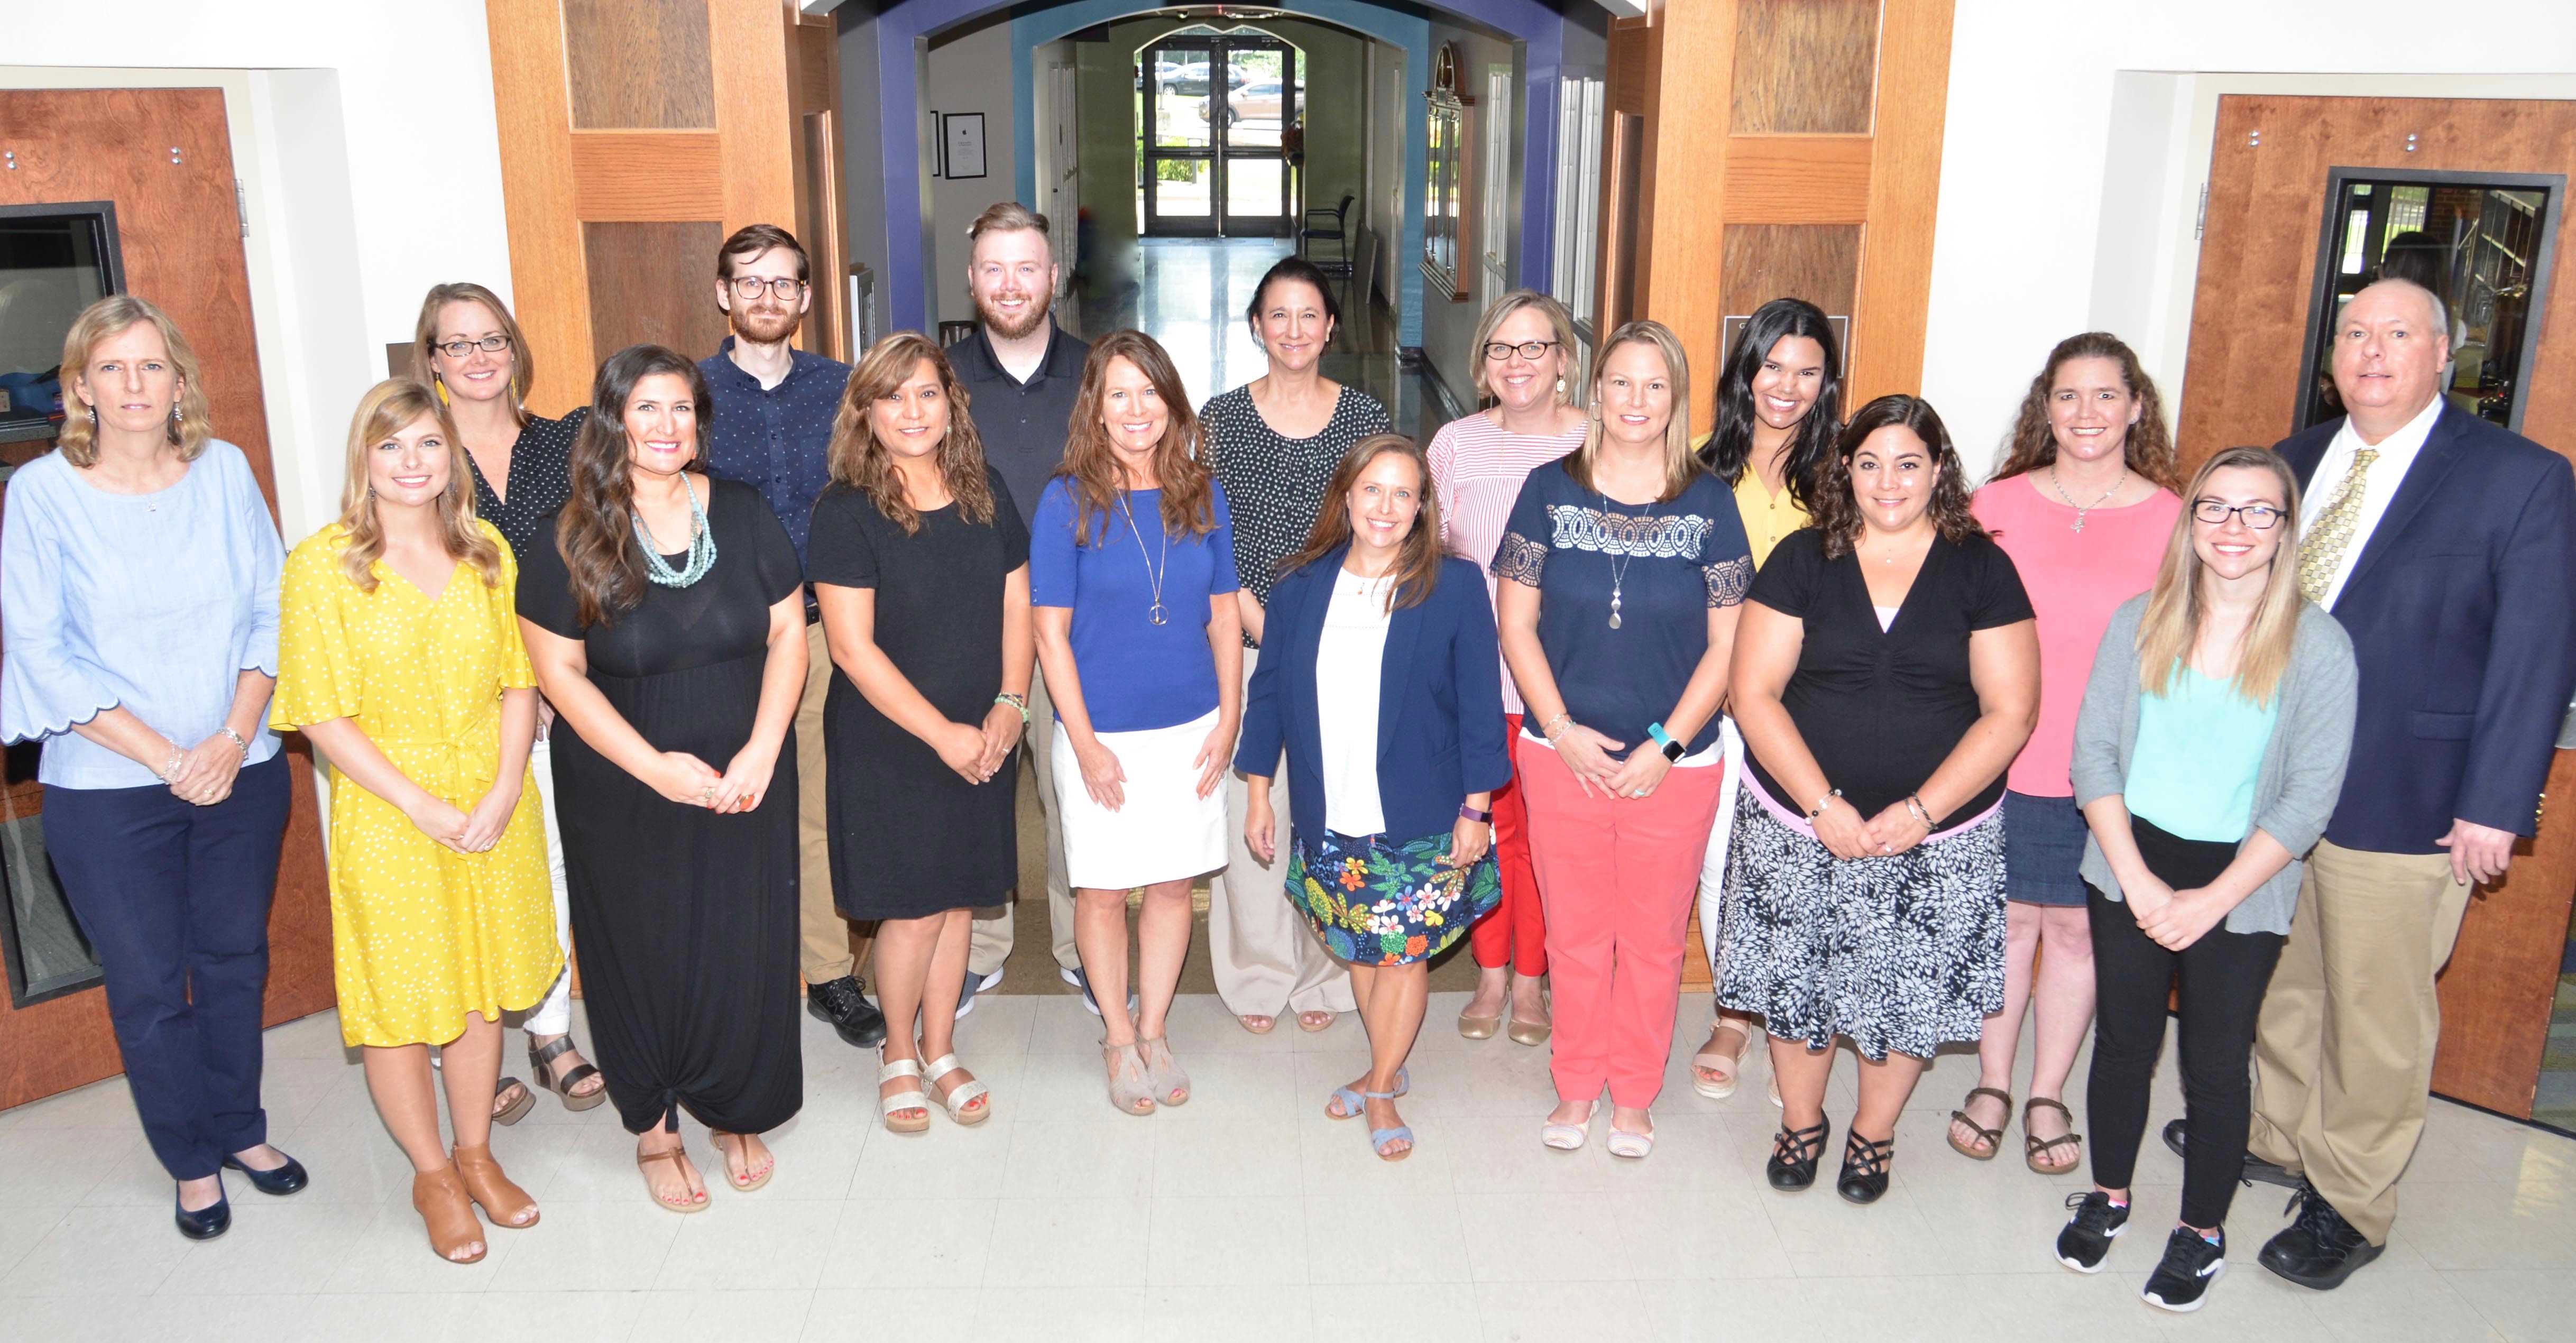 St. Agnes-St. Dominic Welcomes New Faculty